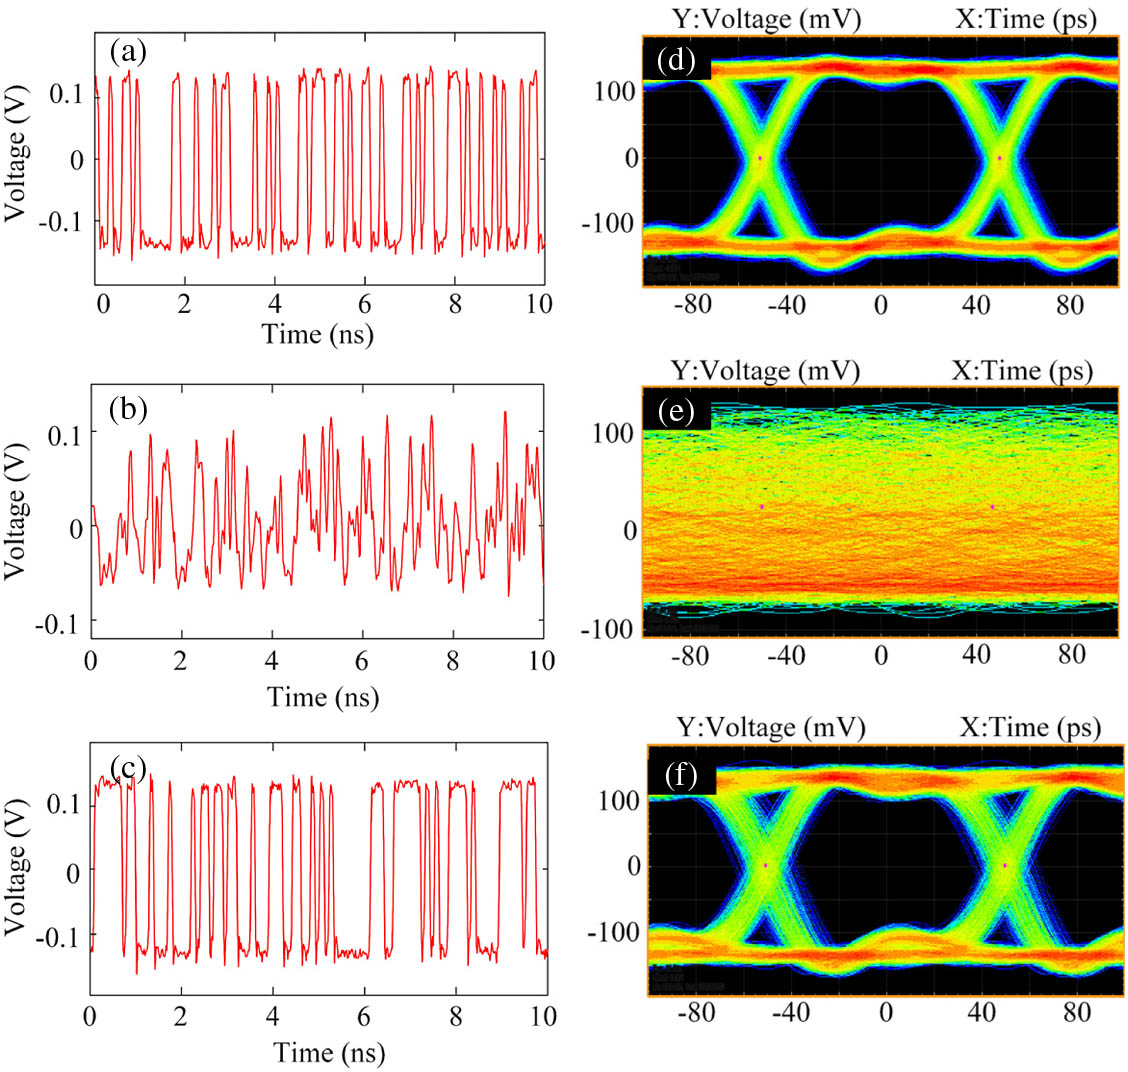 (a) Time series of the original data signal at the output of intensity modulator; (b) time series of the encrypted signal at the output of FBG2; (c) time series of the decrypted signal at the output of FBG4; (d) eye diagram of the original data signal at the output of intensity modulator; (e) eye diagram of the encrypted signal at the output of FBG2; (f) eye diagram of the decrypted signal at the output of FBG4.